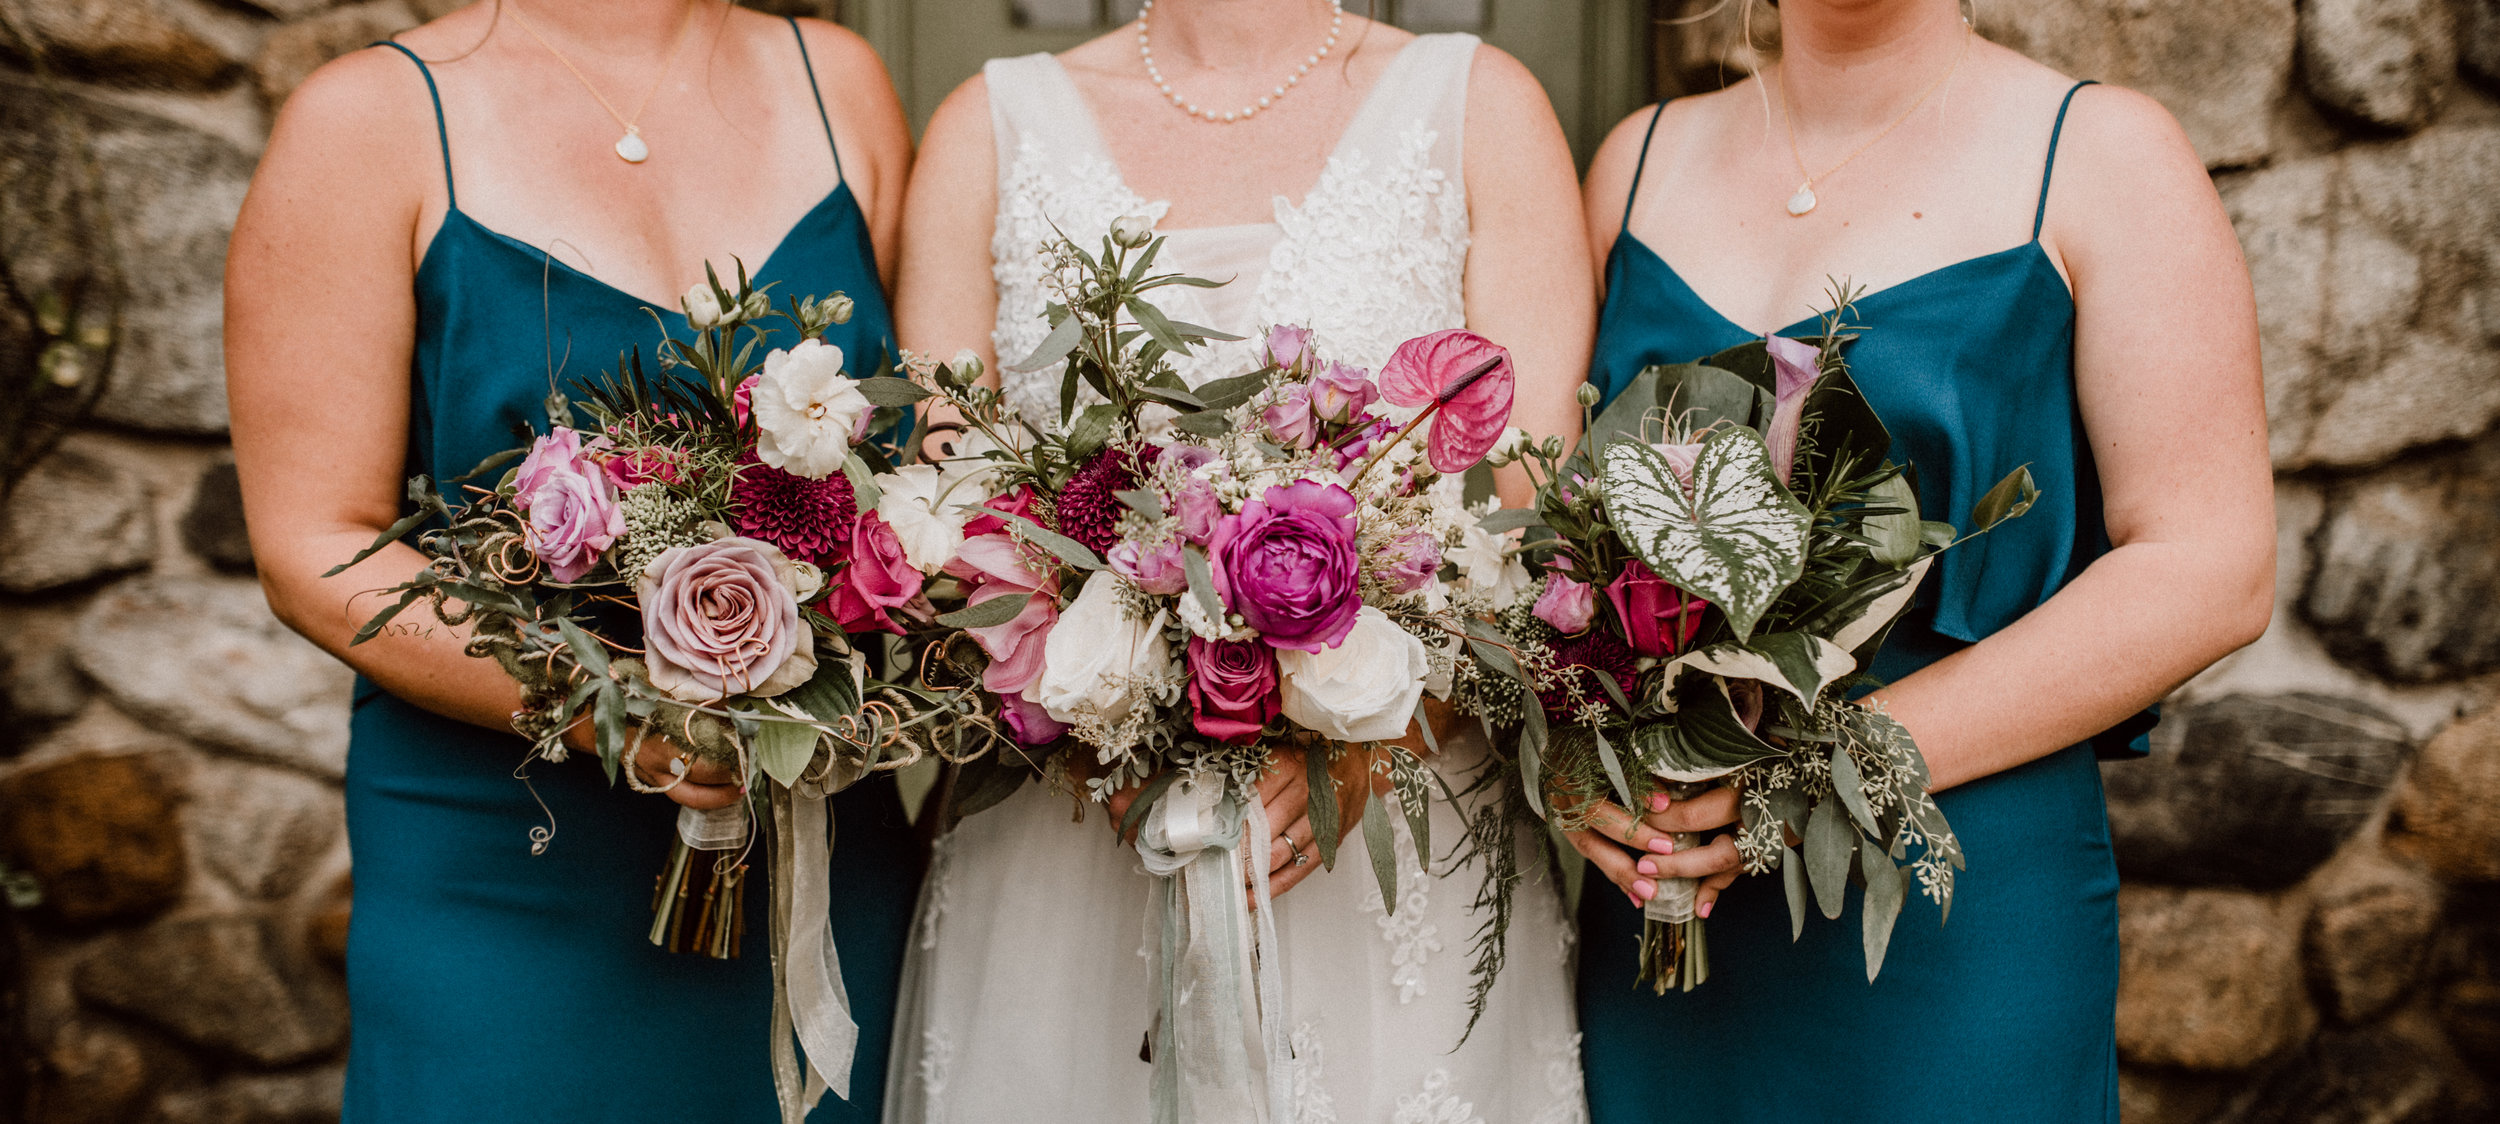 Bouquets with a Conservatory vibe